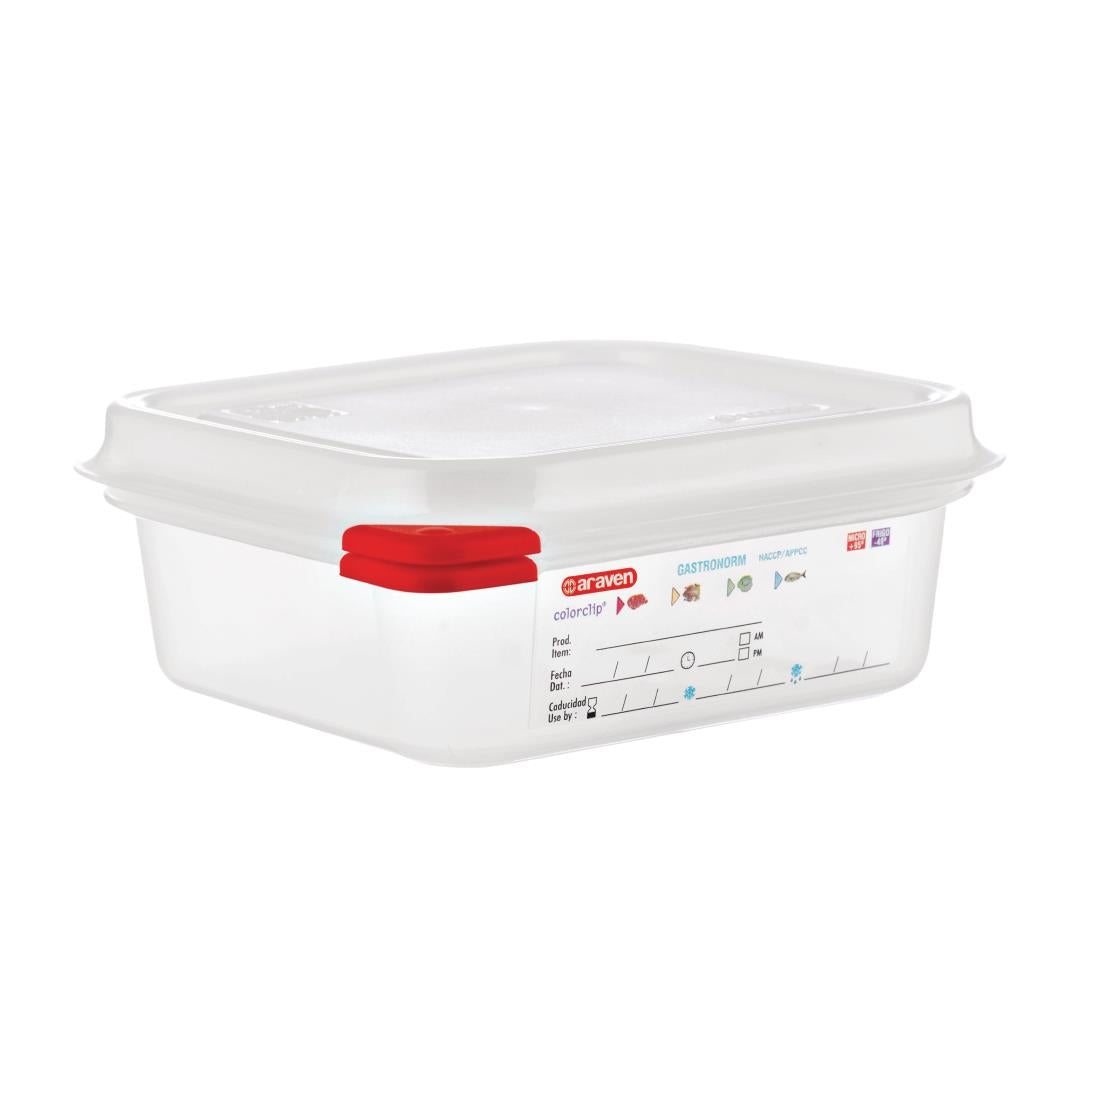 Araven Polypropylene 1/6 Gastronorm Food Storage Containers 1.1Ltr (Pack of 4) JD Catering Equipment Solutions Ltd